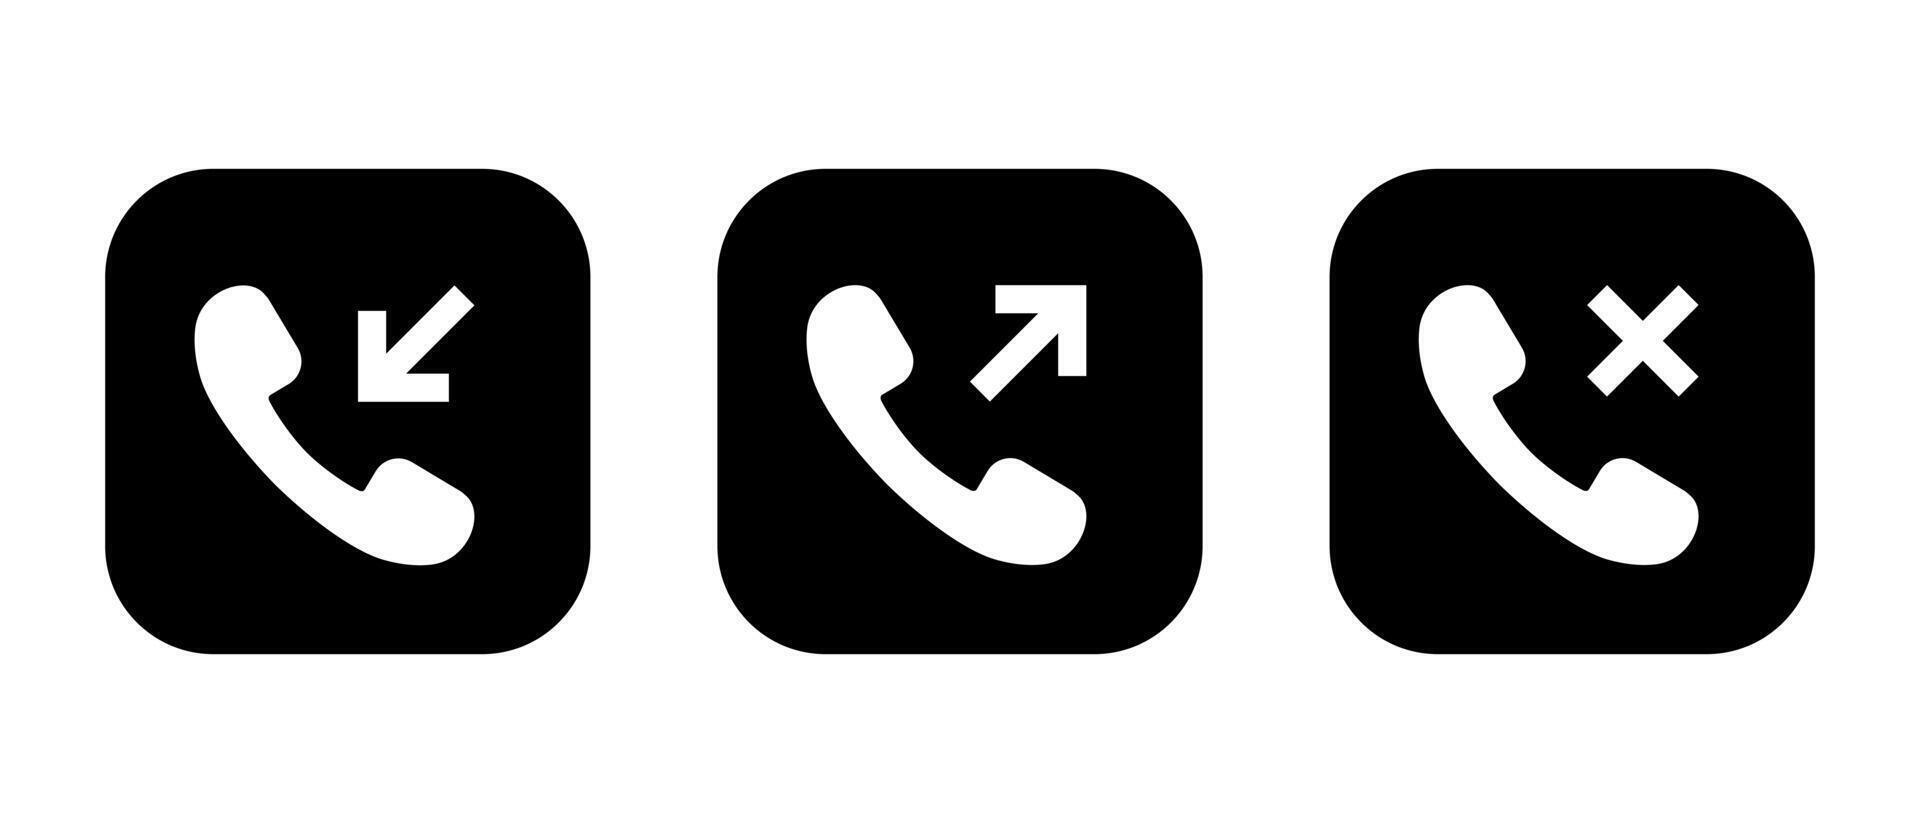 Incoming, outgoing, and missed call icon on black square vector